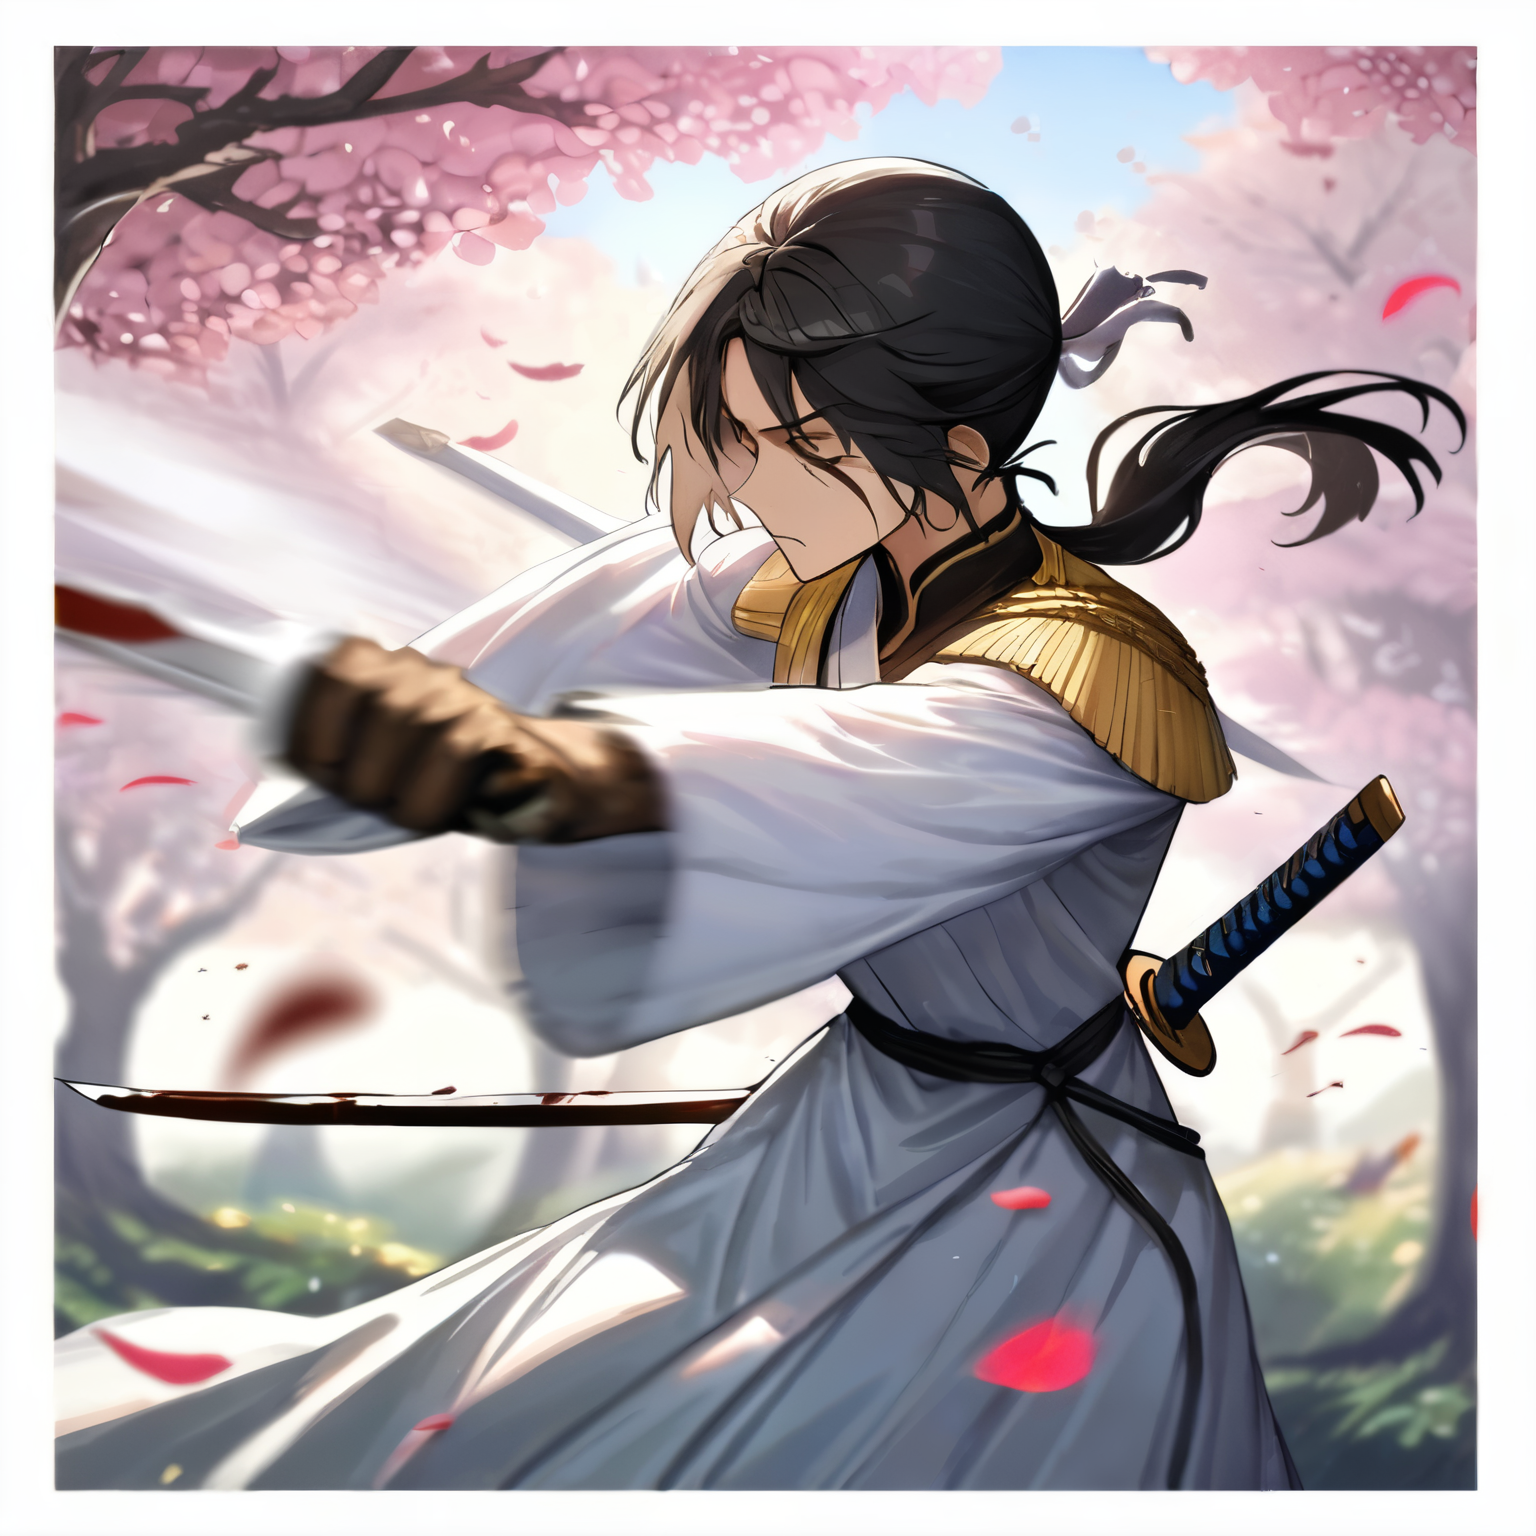 (blood),(motion blur),(dress in white),Petals fluttering in the wind, shining swords, helpless expression, anger, fighting with death, very detailed expression, very detailed petals,ponytail, 2swordsman fighting,fight,gongfu,stand in trees, 2swordsman stood in a peach tree forest with petals dancing,petals , detailed ,completing the stable diffusion of serenity and contentment,masterpiece, best quality,masterpiece, best quality, swordman,holding a sword(trees:0.5),(eagle:0.5), (bamboo:0.2) fighting stance, 1man, glowing, solo, weapon, sword, tree, holding, gloves, outdoors, sheath, border, holding weapon, black hair, holding sword, fur trim, looking away,look at view